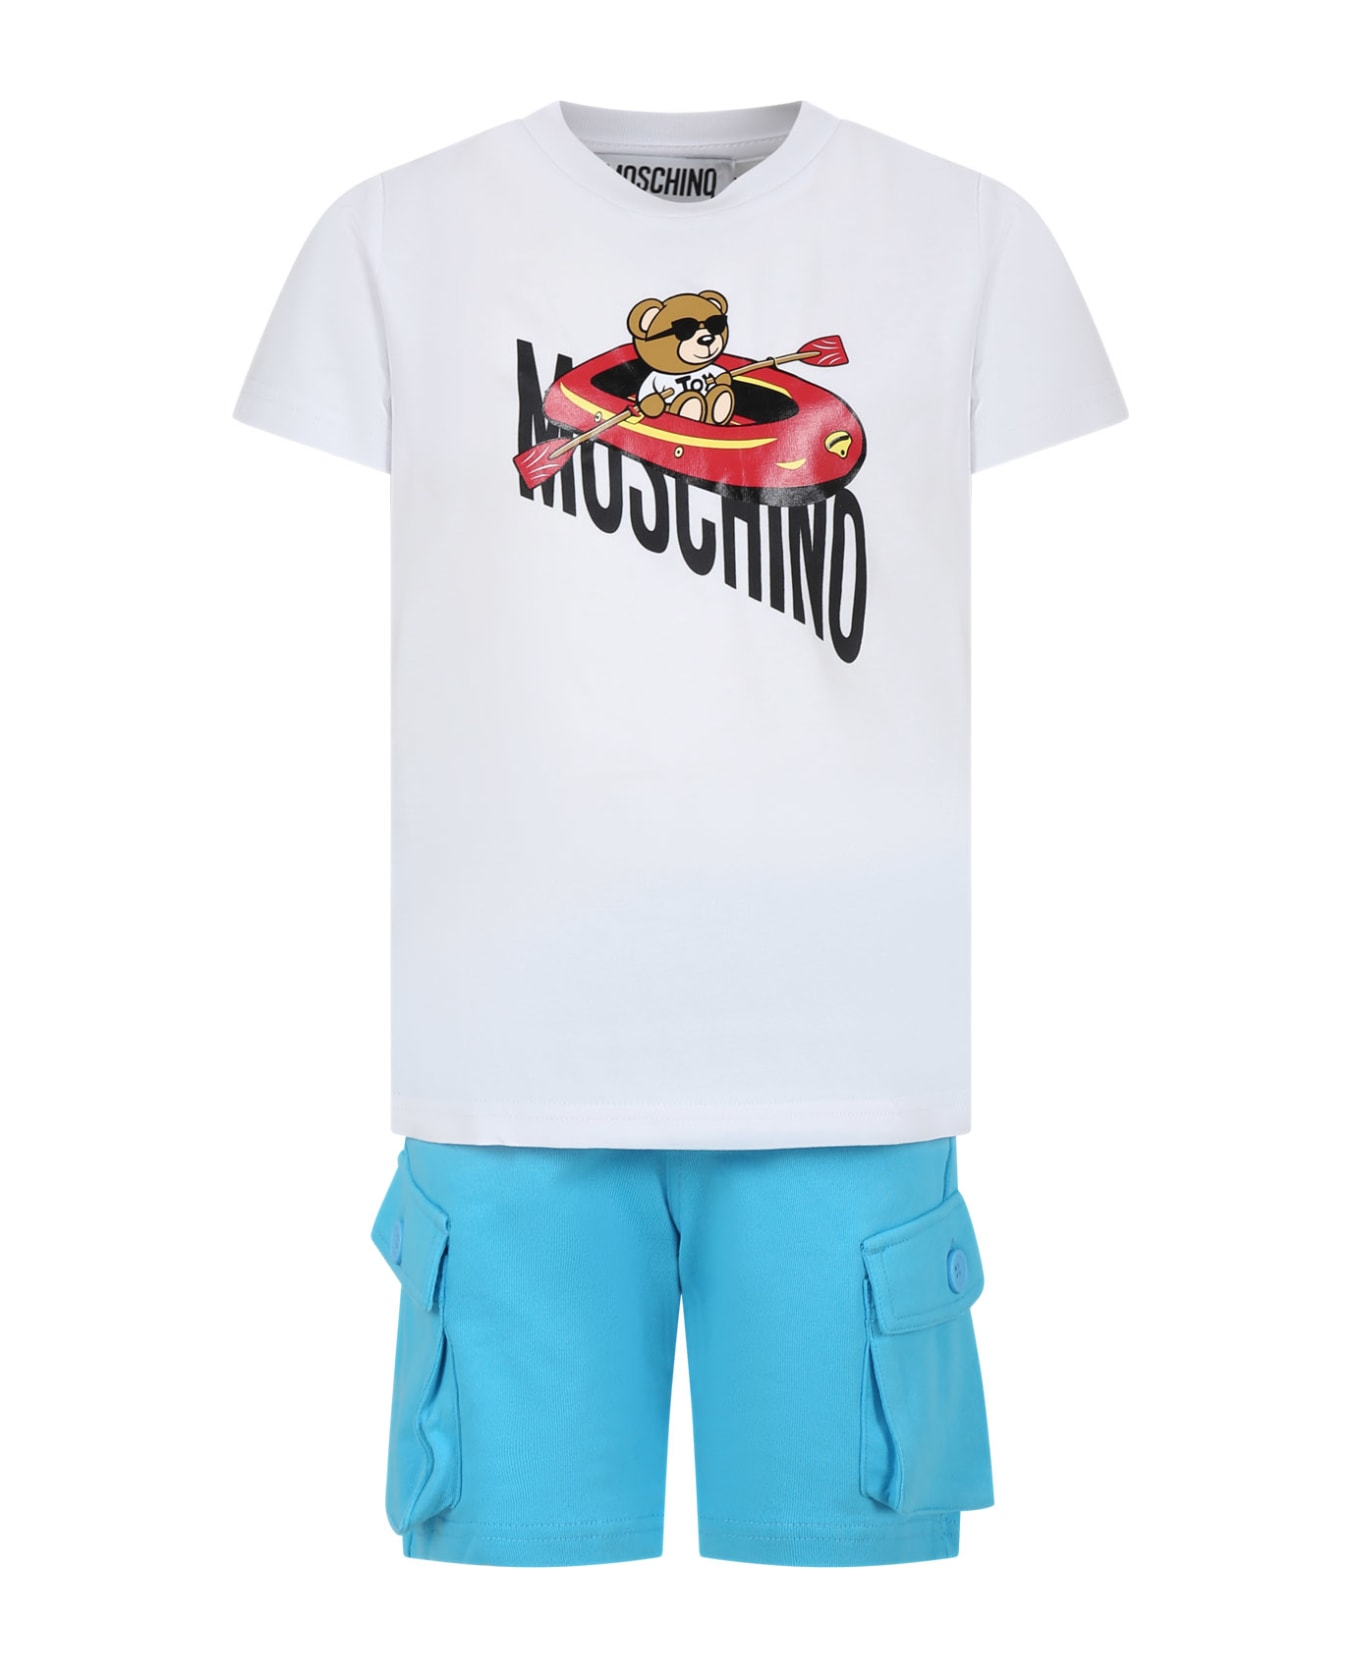 Moschino Multicolored Set For Boy With Teddy Bear - Multicolor